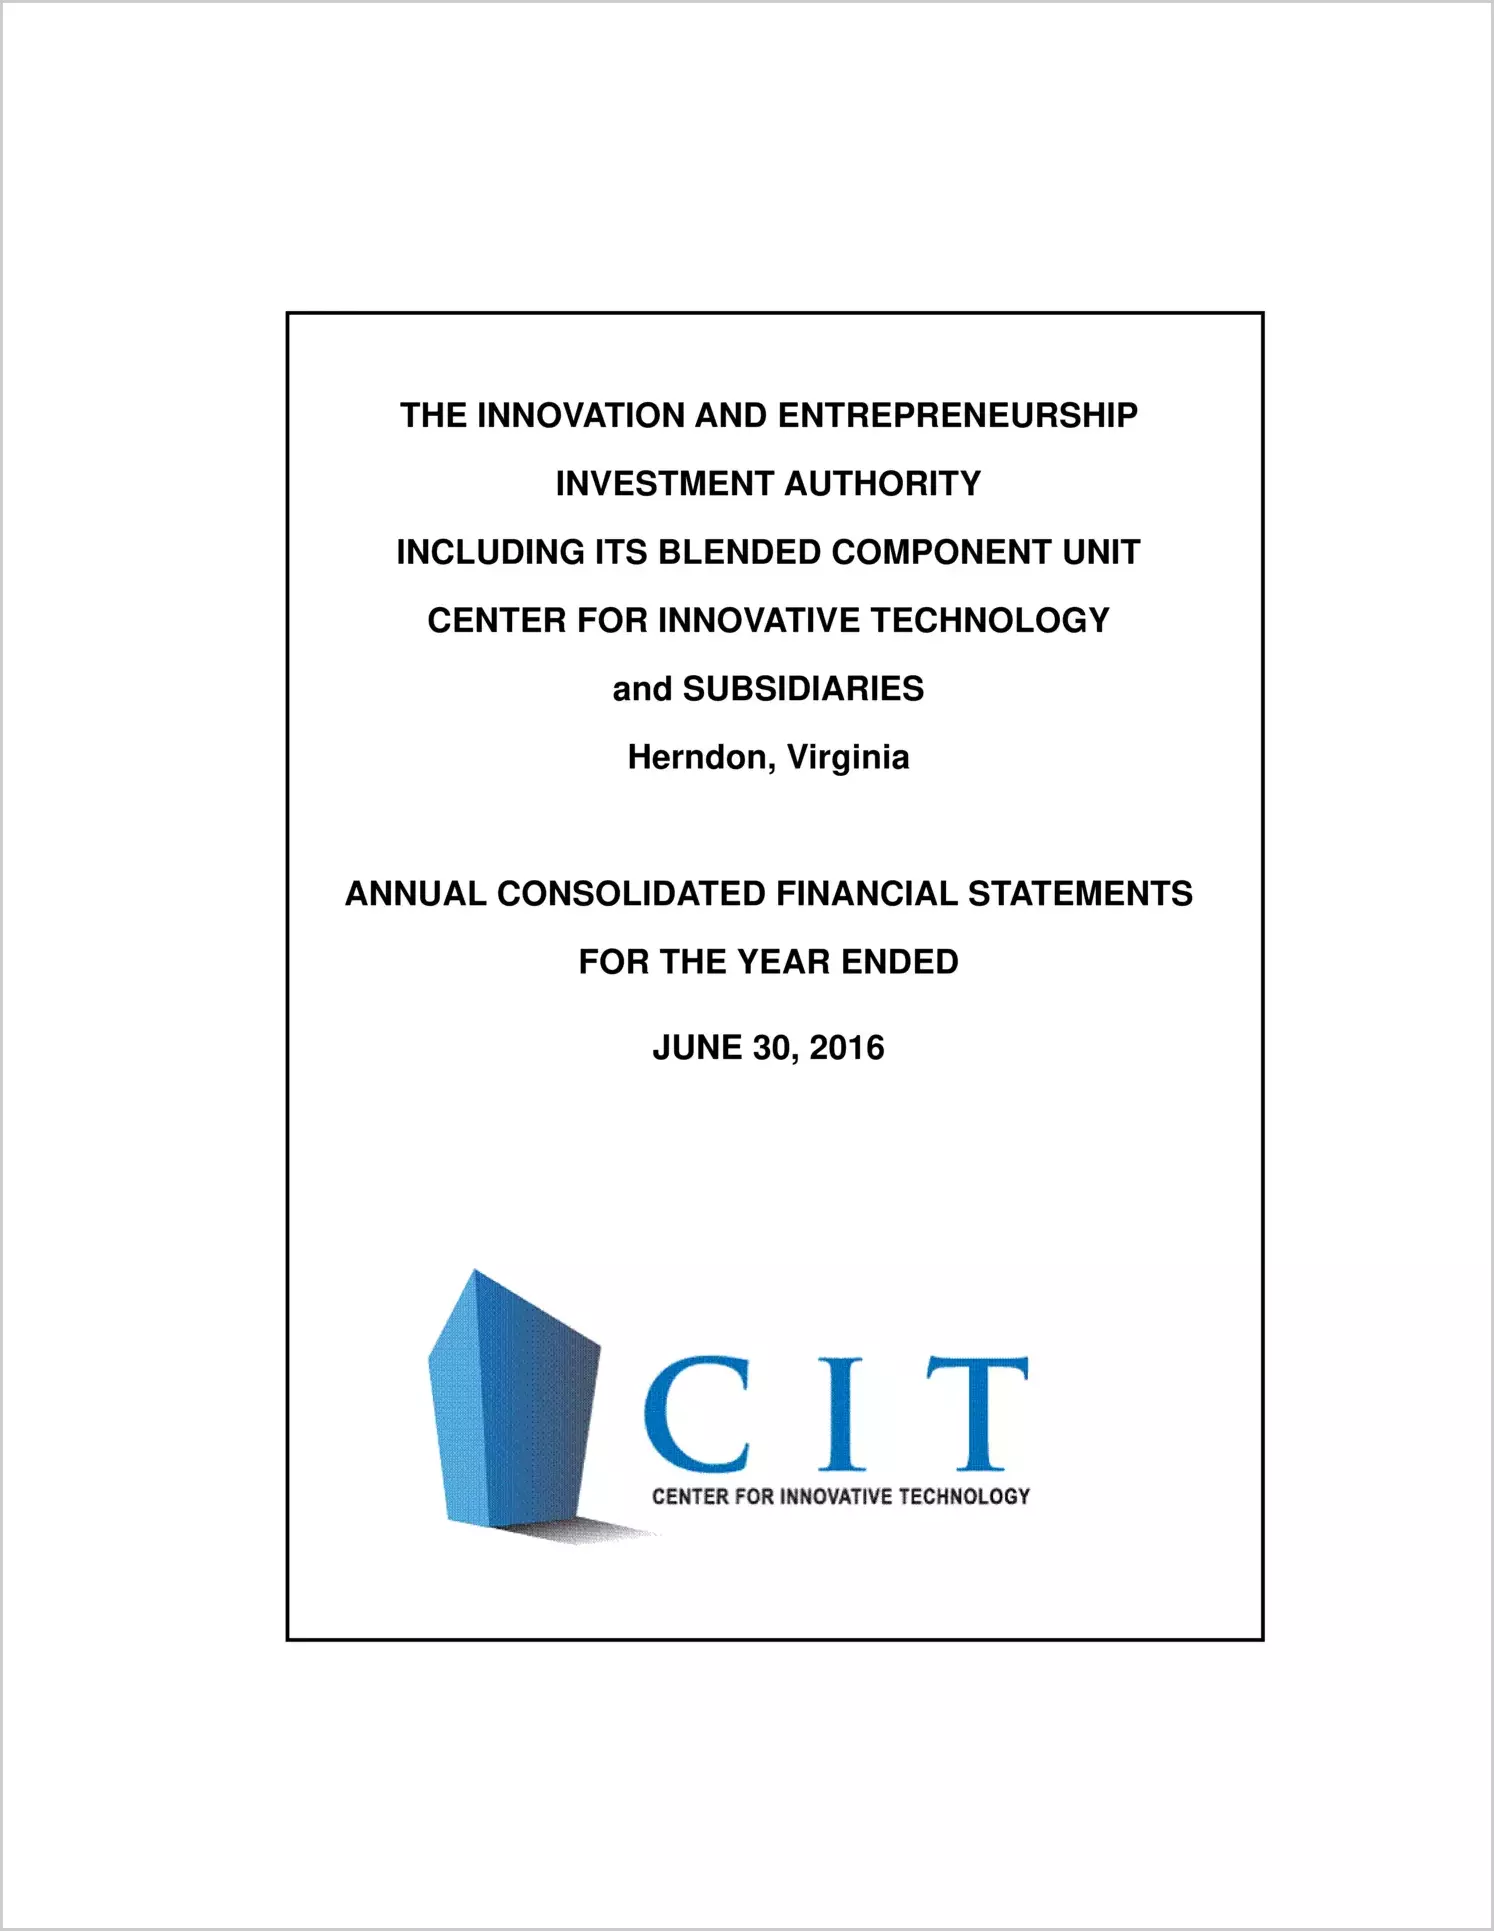 Innovation and Entrepreneurship Investment Authority and Center for Innovative Technology Financial Statements for the year ended June 30, 2016